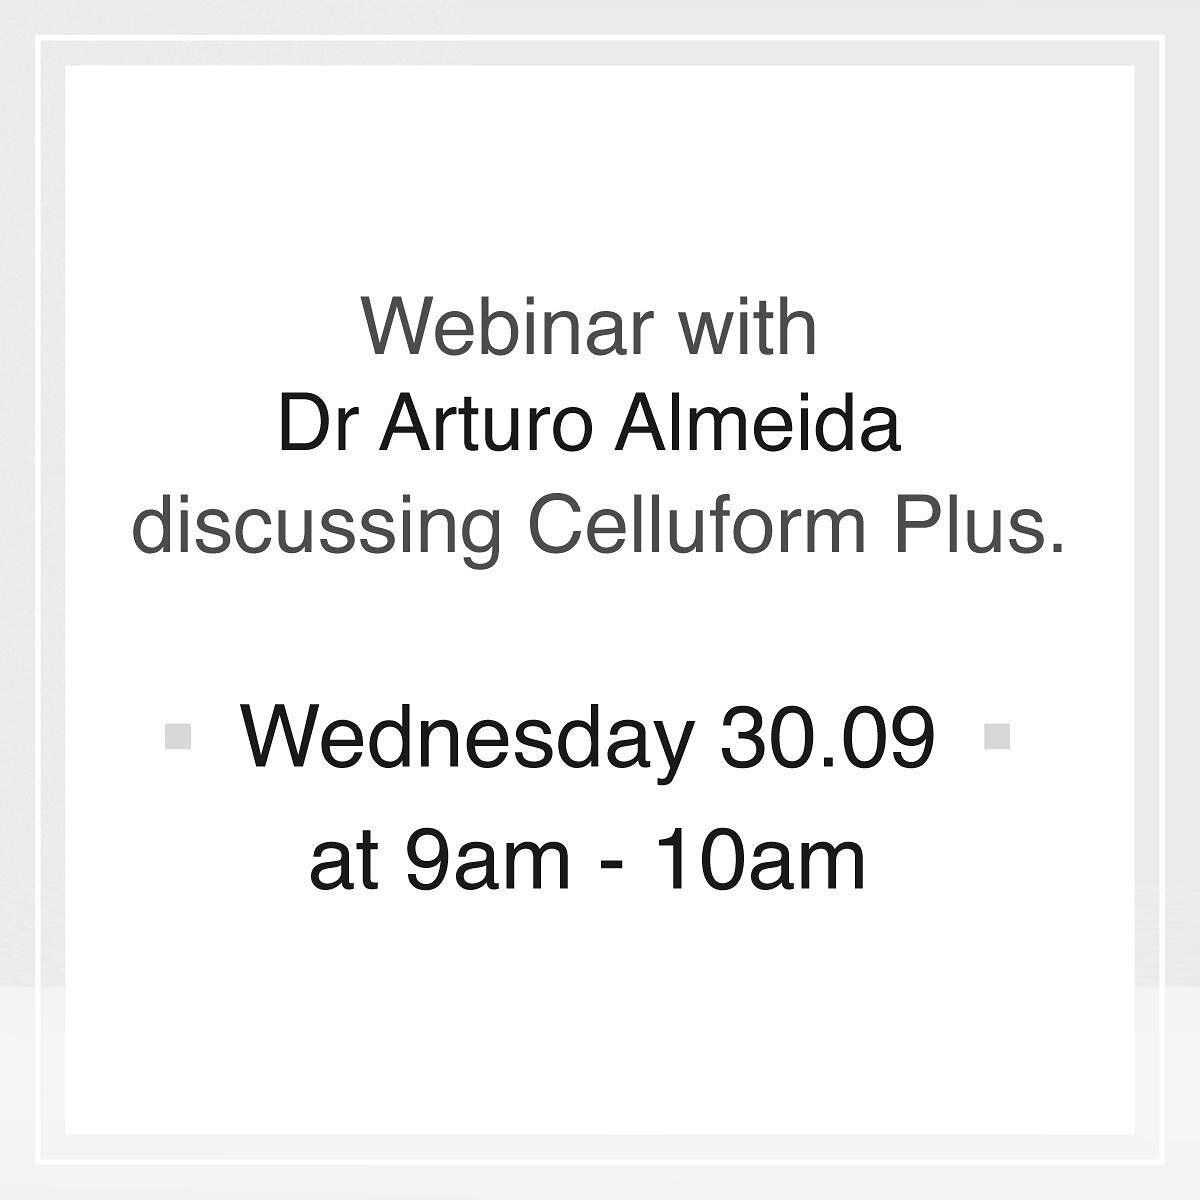 Join this upcoming webinar with @docarzur discussing his experience and knowledge about Celluform Plus #DrArturoAlmedia #celluformplus #deoxycholicacid #amedicauk Send us your email and we&rsquo;ll send you the link invite!